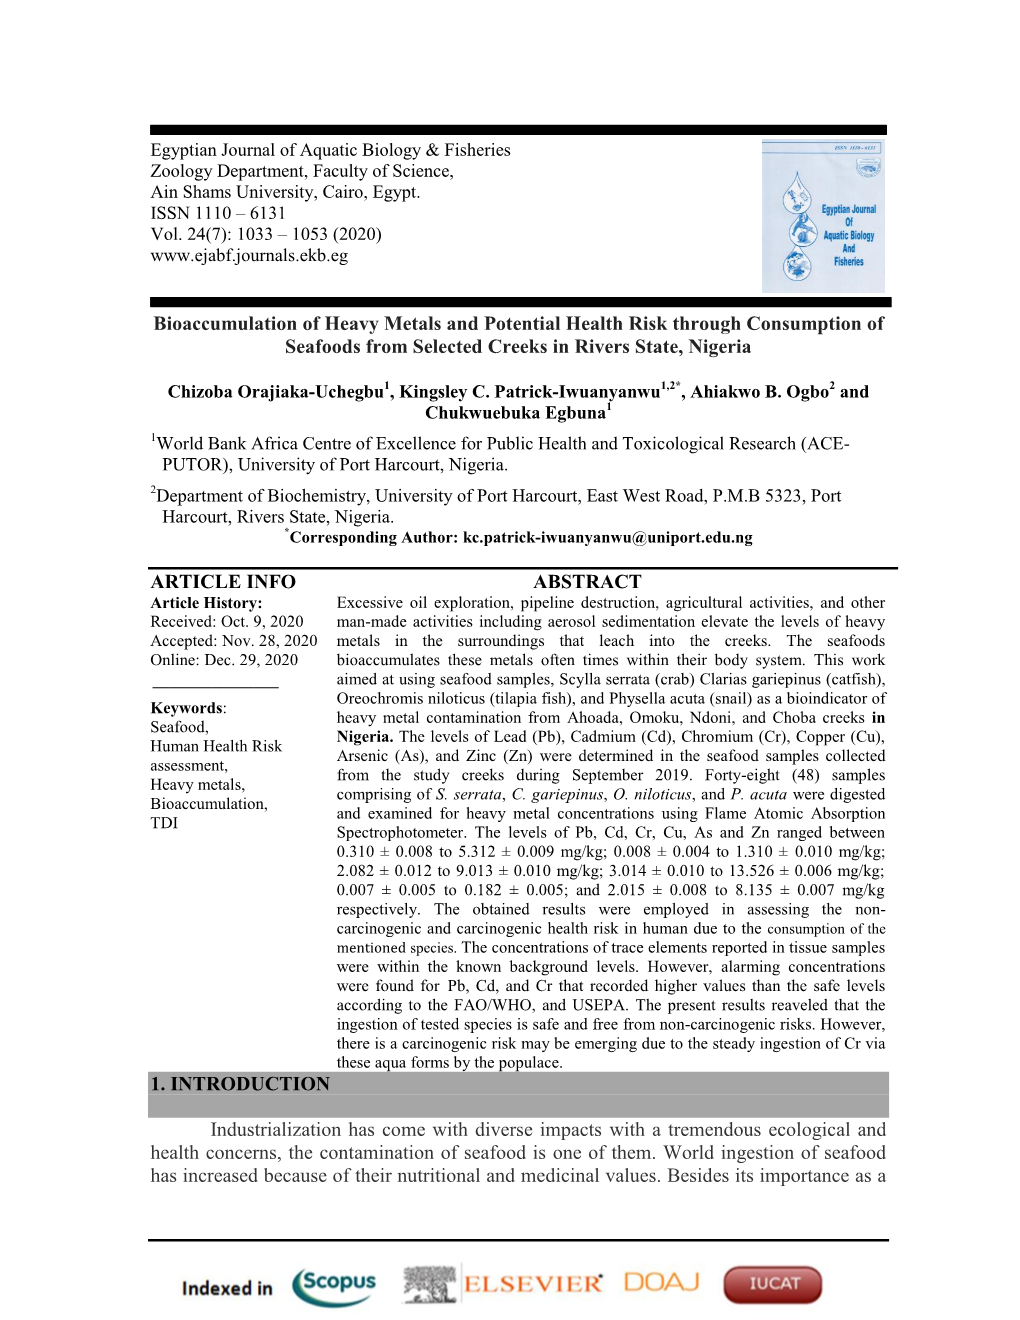 Bioaccumulation of Heavy Metals and Potential Health Risk Through Consumption of Seafoods from Selected Creeks in Rivers State, Nigeria